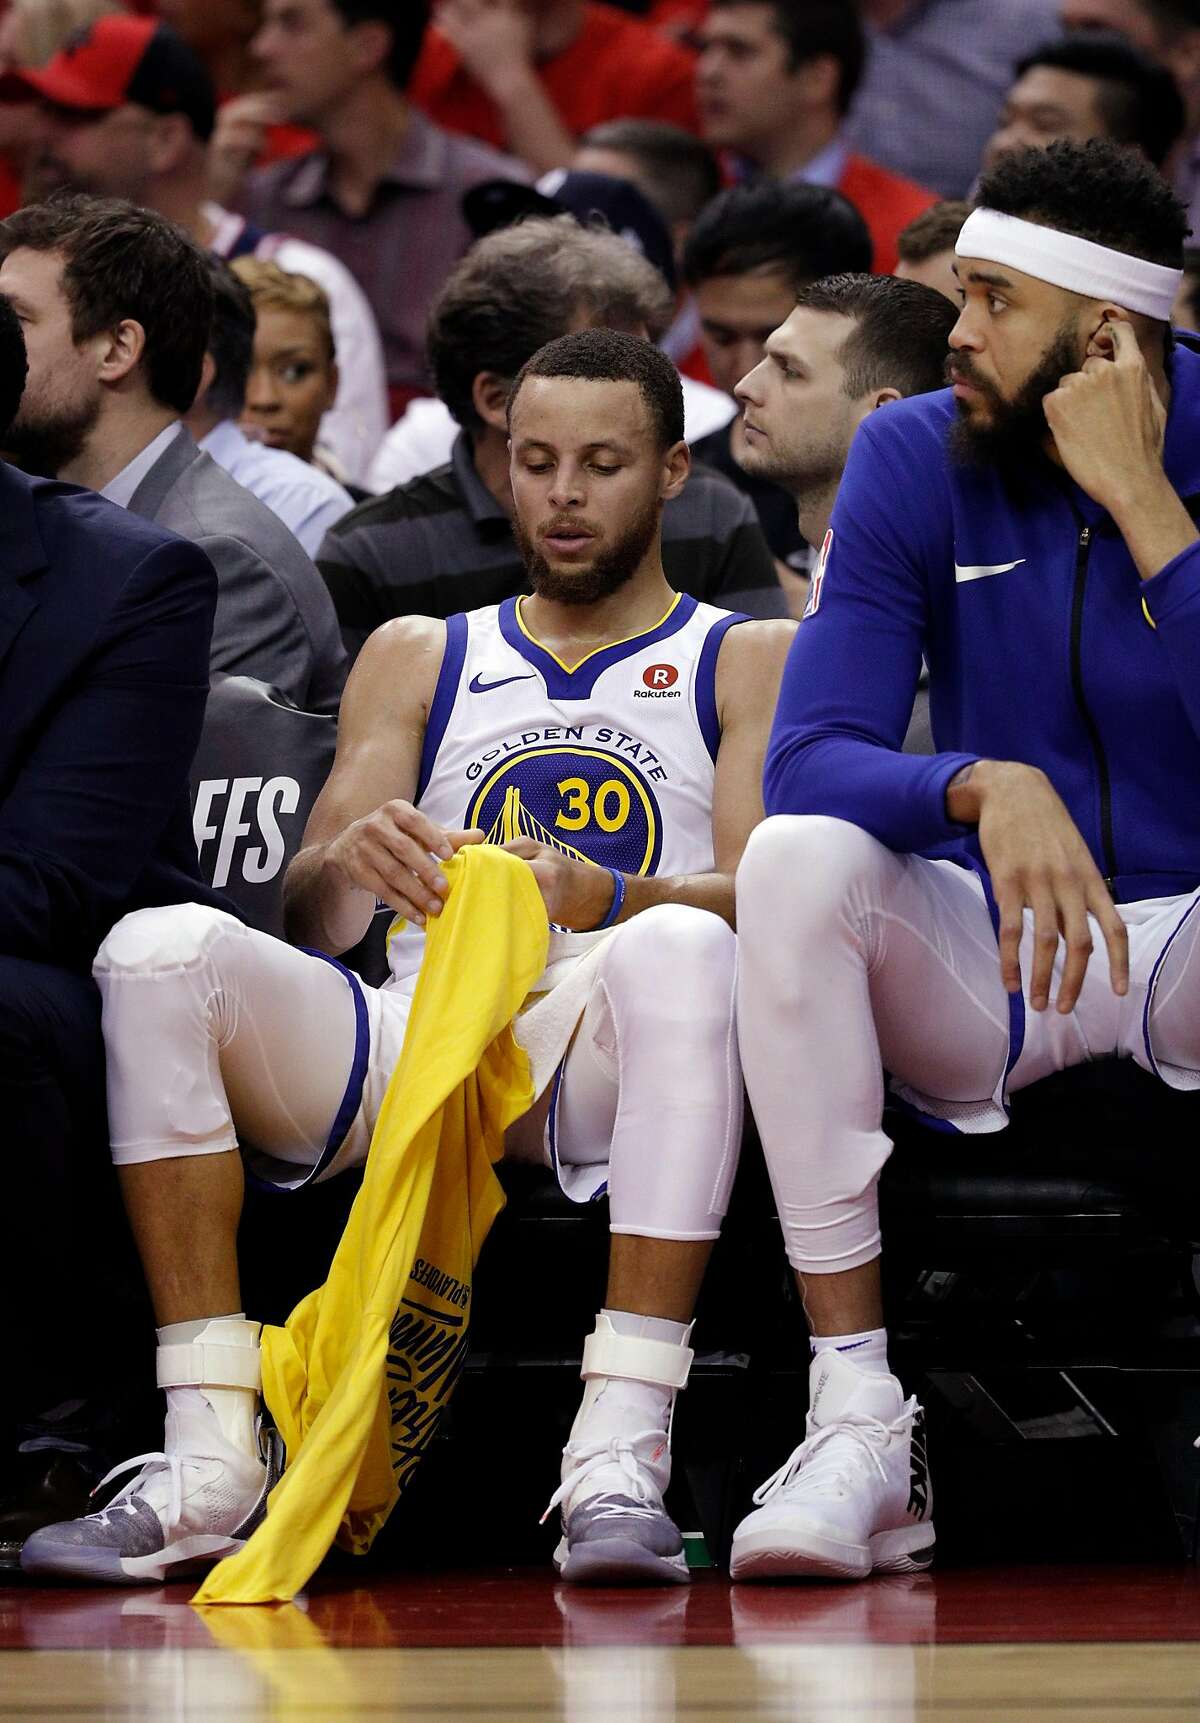 Warriors lose big to Rockets: What s wrong with Steph Curry?